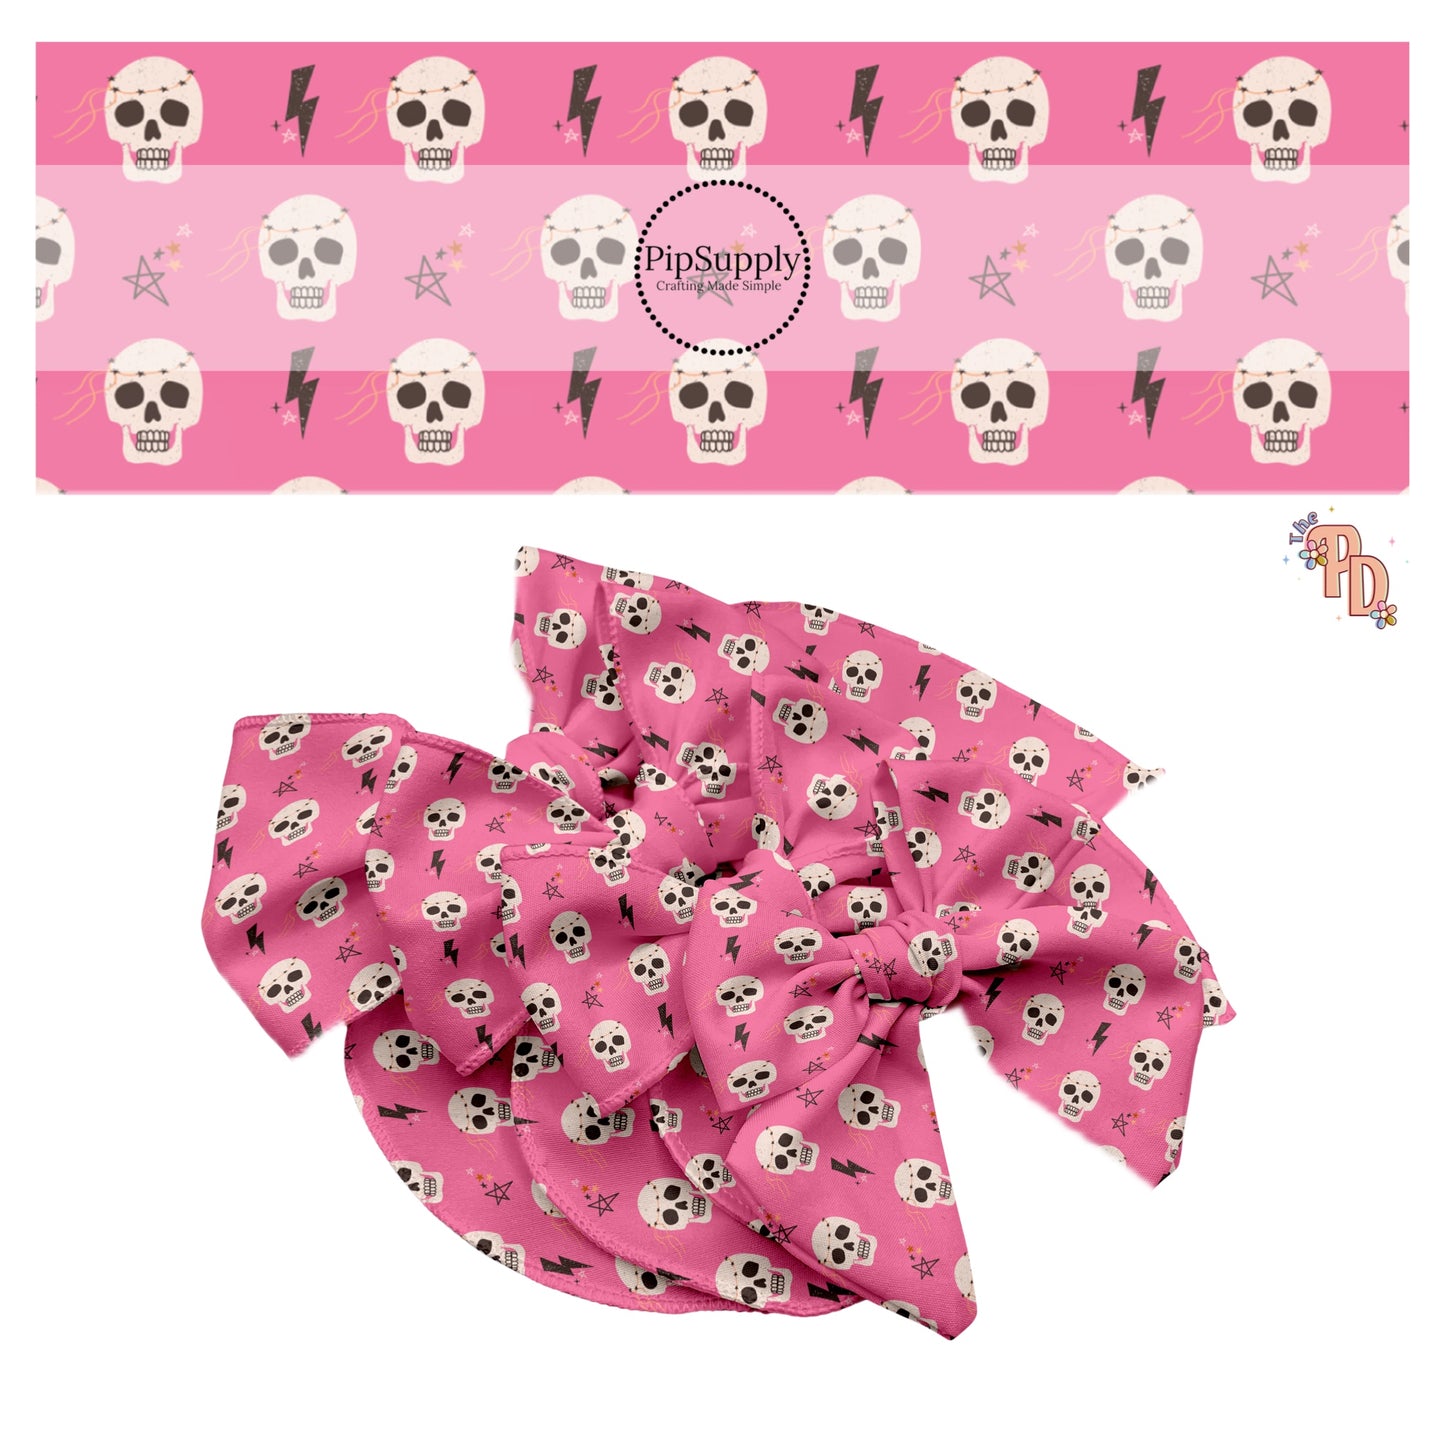 Skulls, lightning bolts, and stars on pink hair bow strips